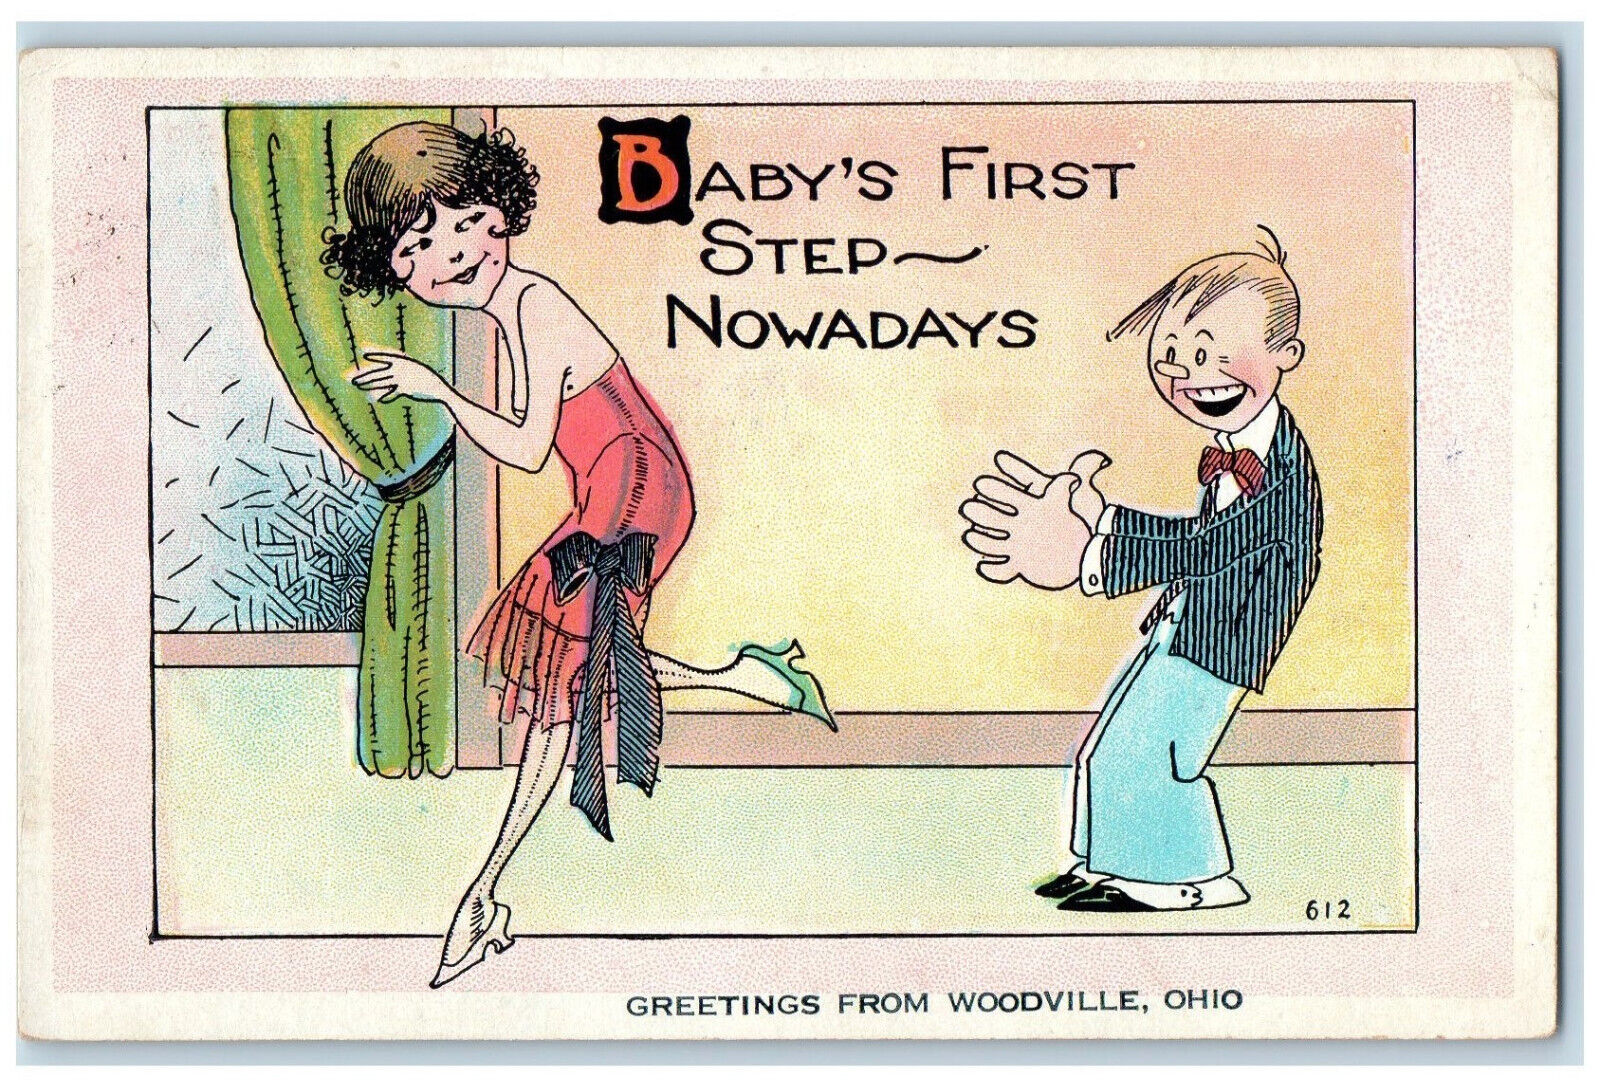 1929 Greetings From Woodville Ohio OH, Baby's First Step Nowadays Humor Postcard